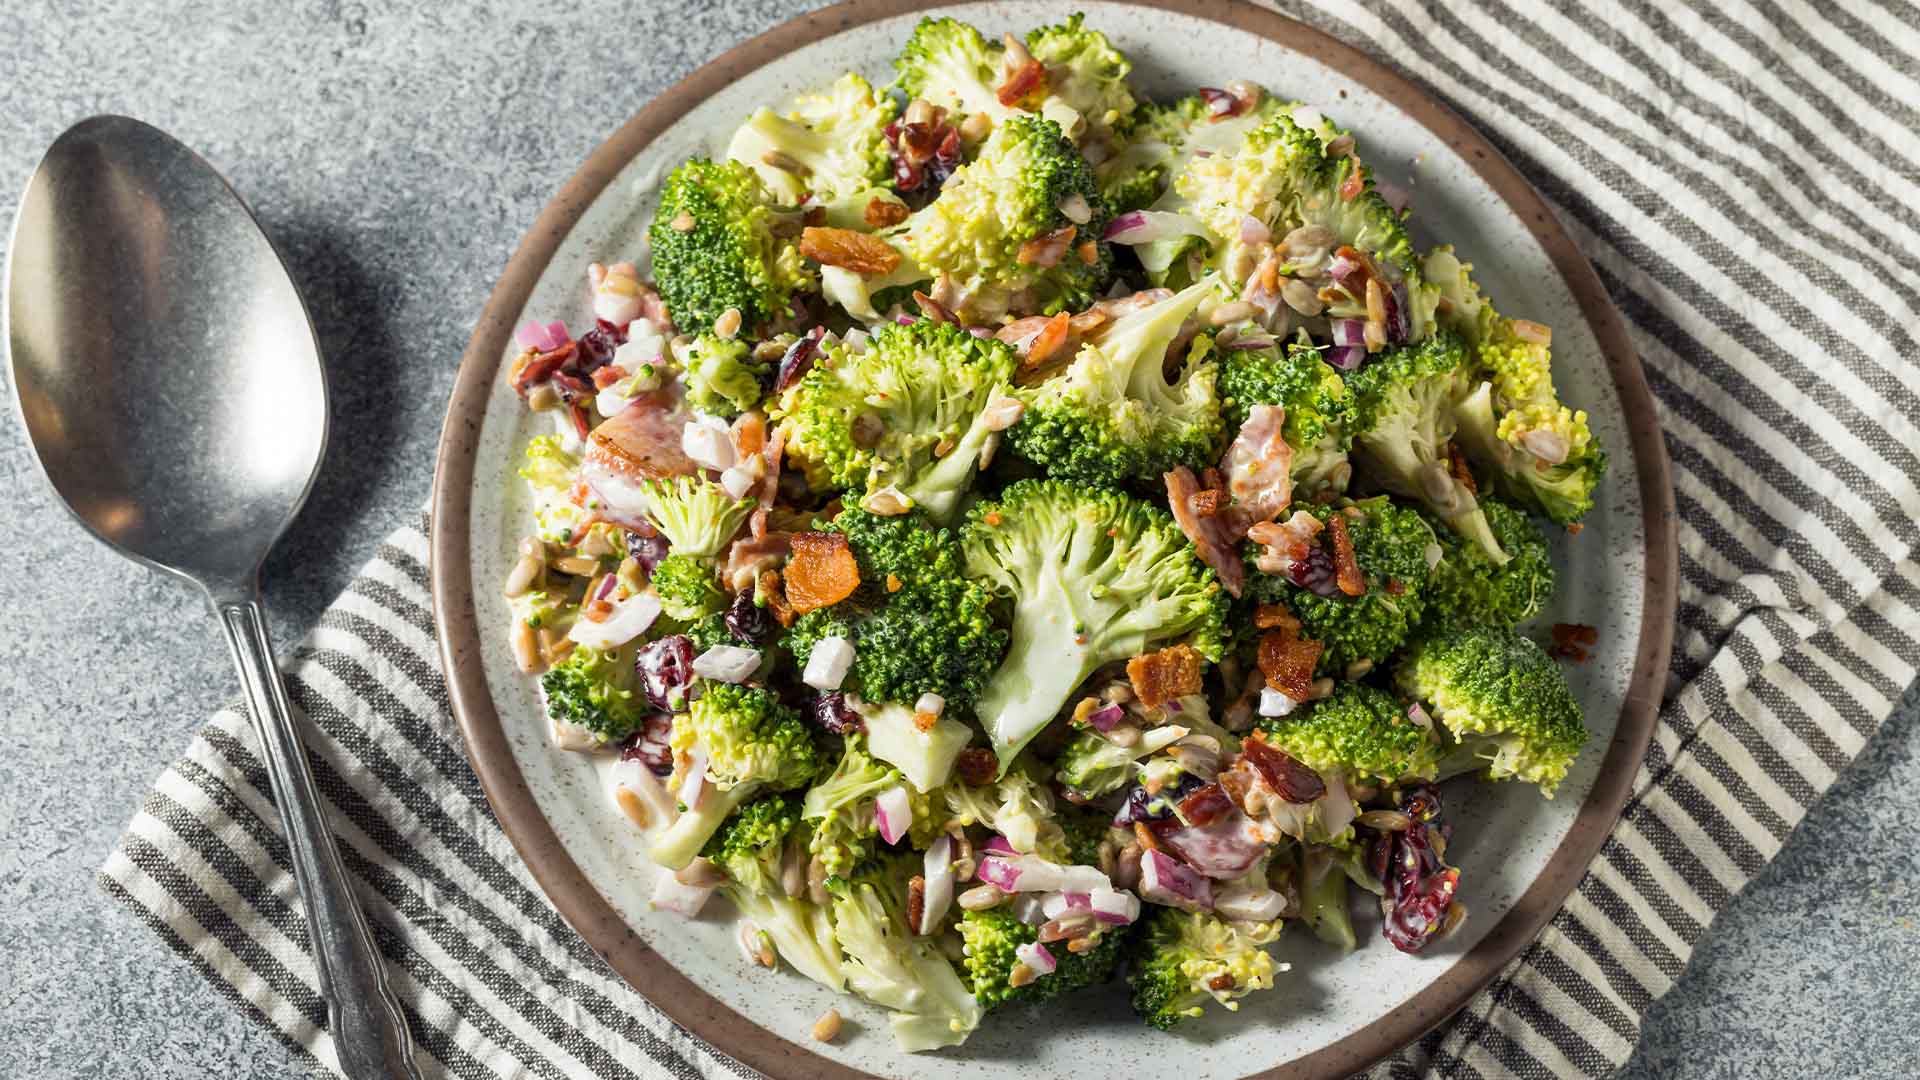 Featured image for “Loaded Broccoli Salad”